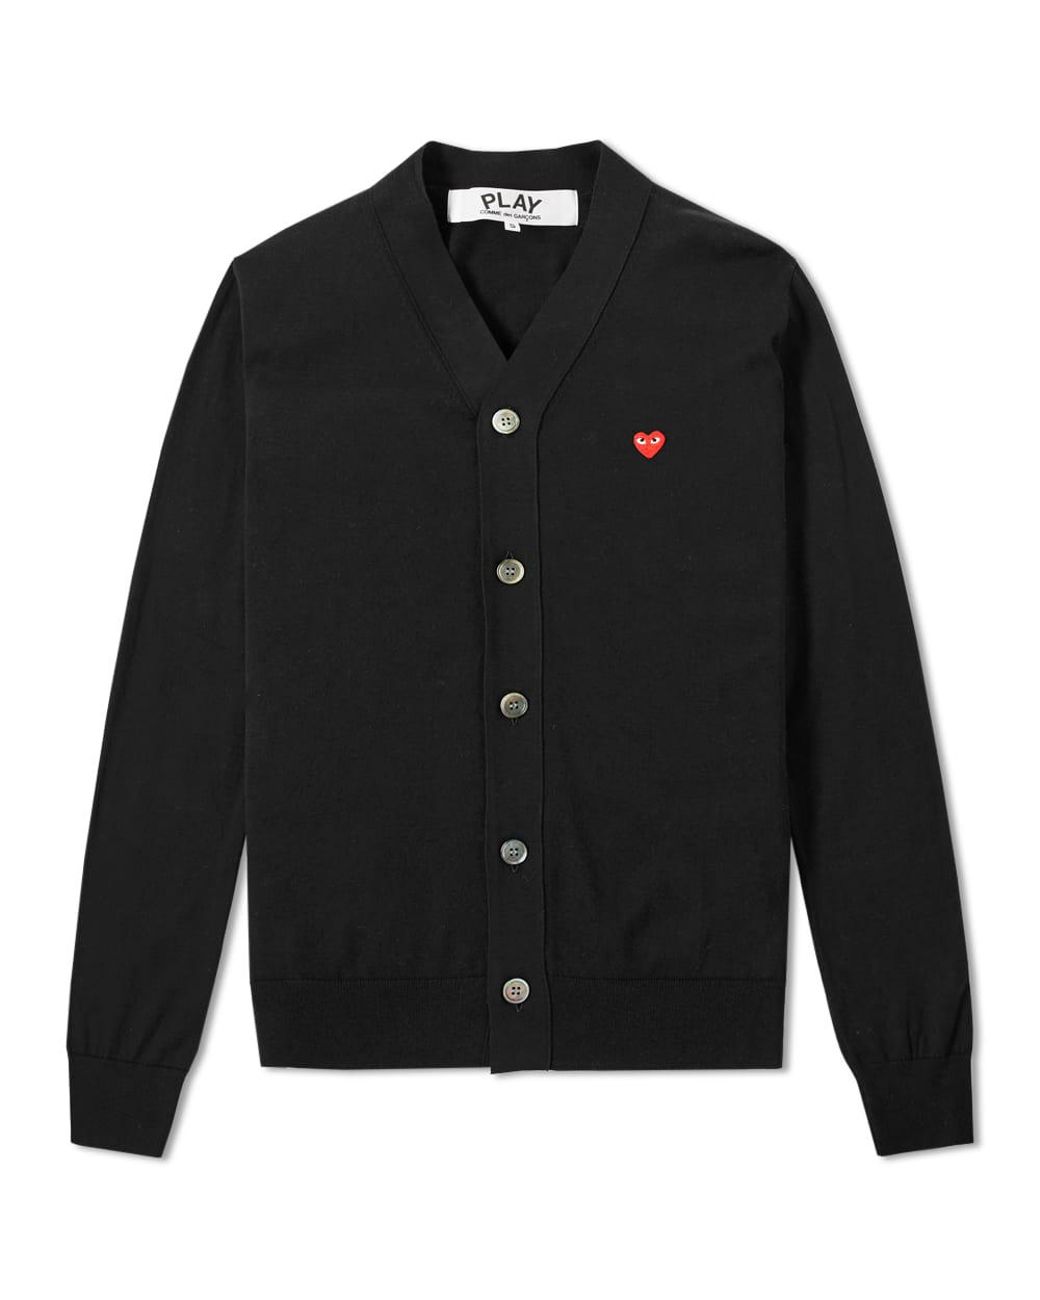 Lyst - Comme Des Garçons Play Play Cardigan in Black for Men - Save 14. ...